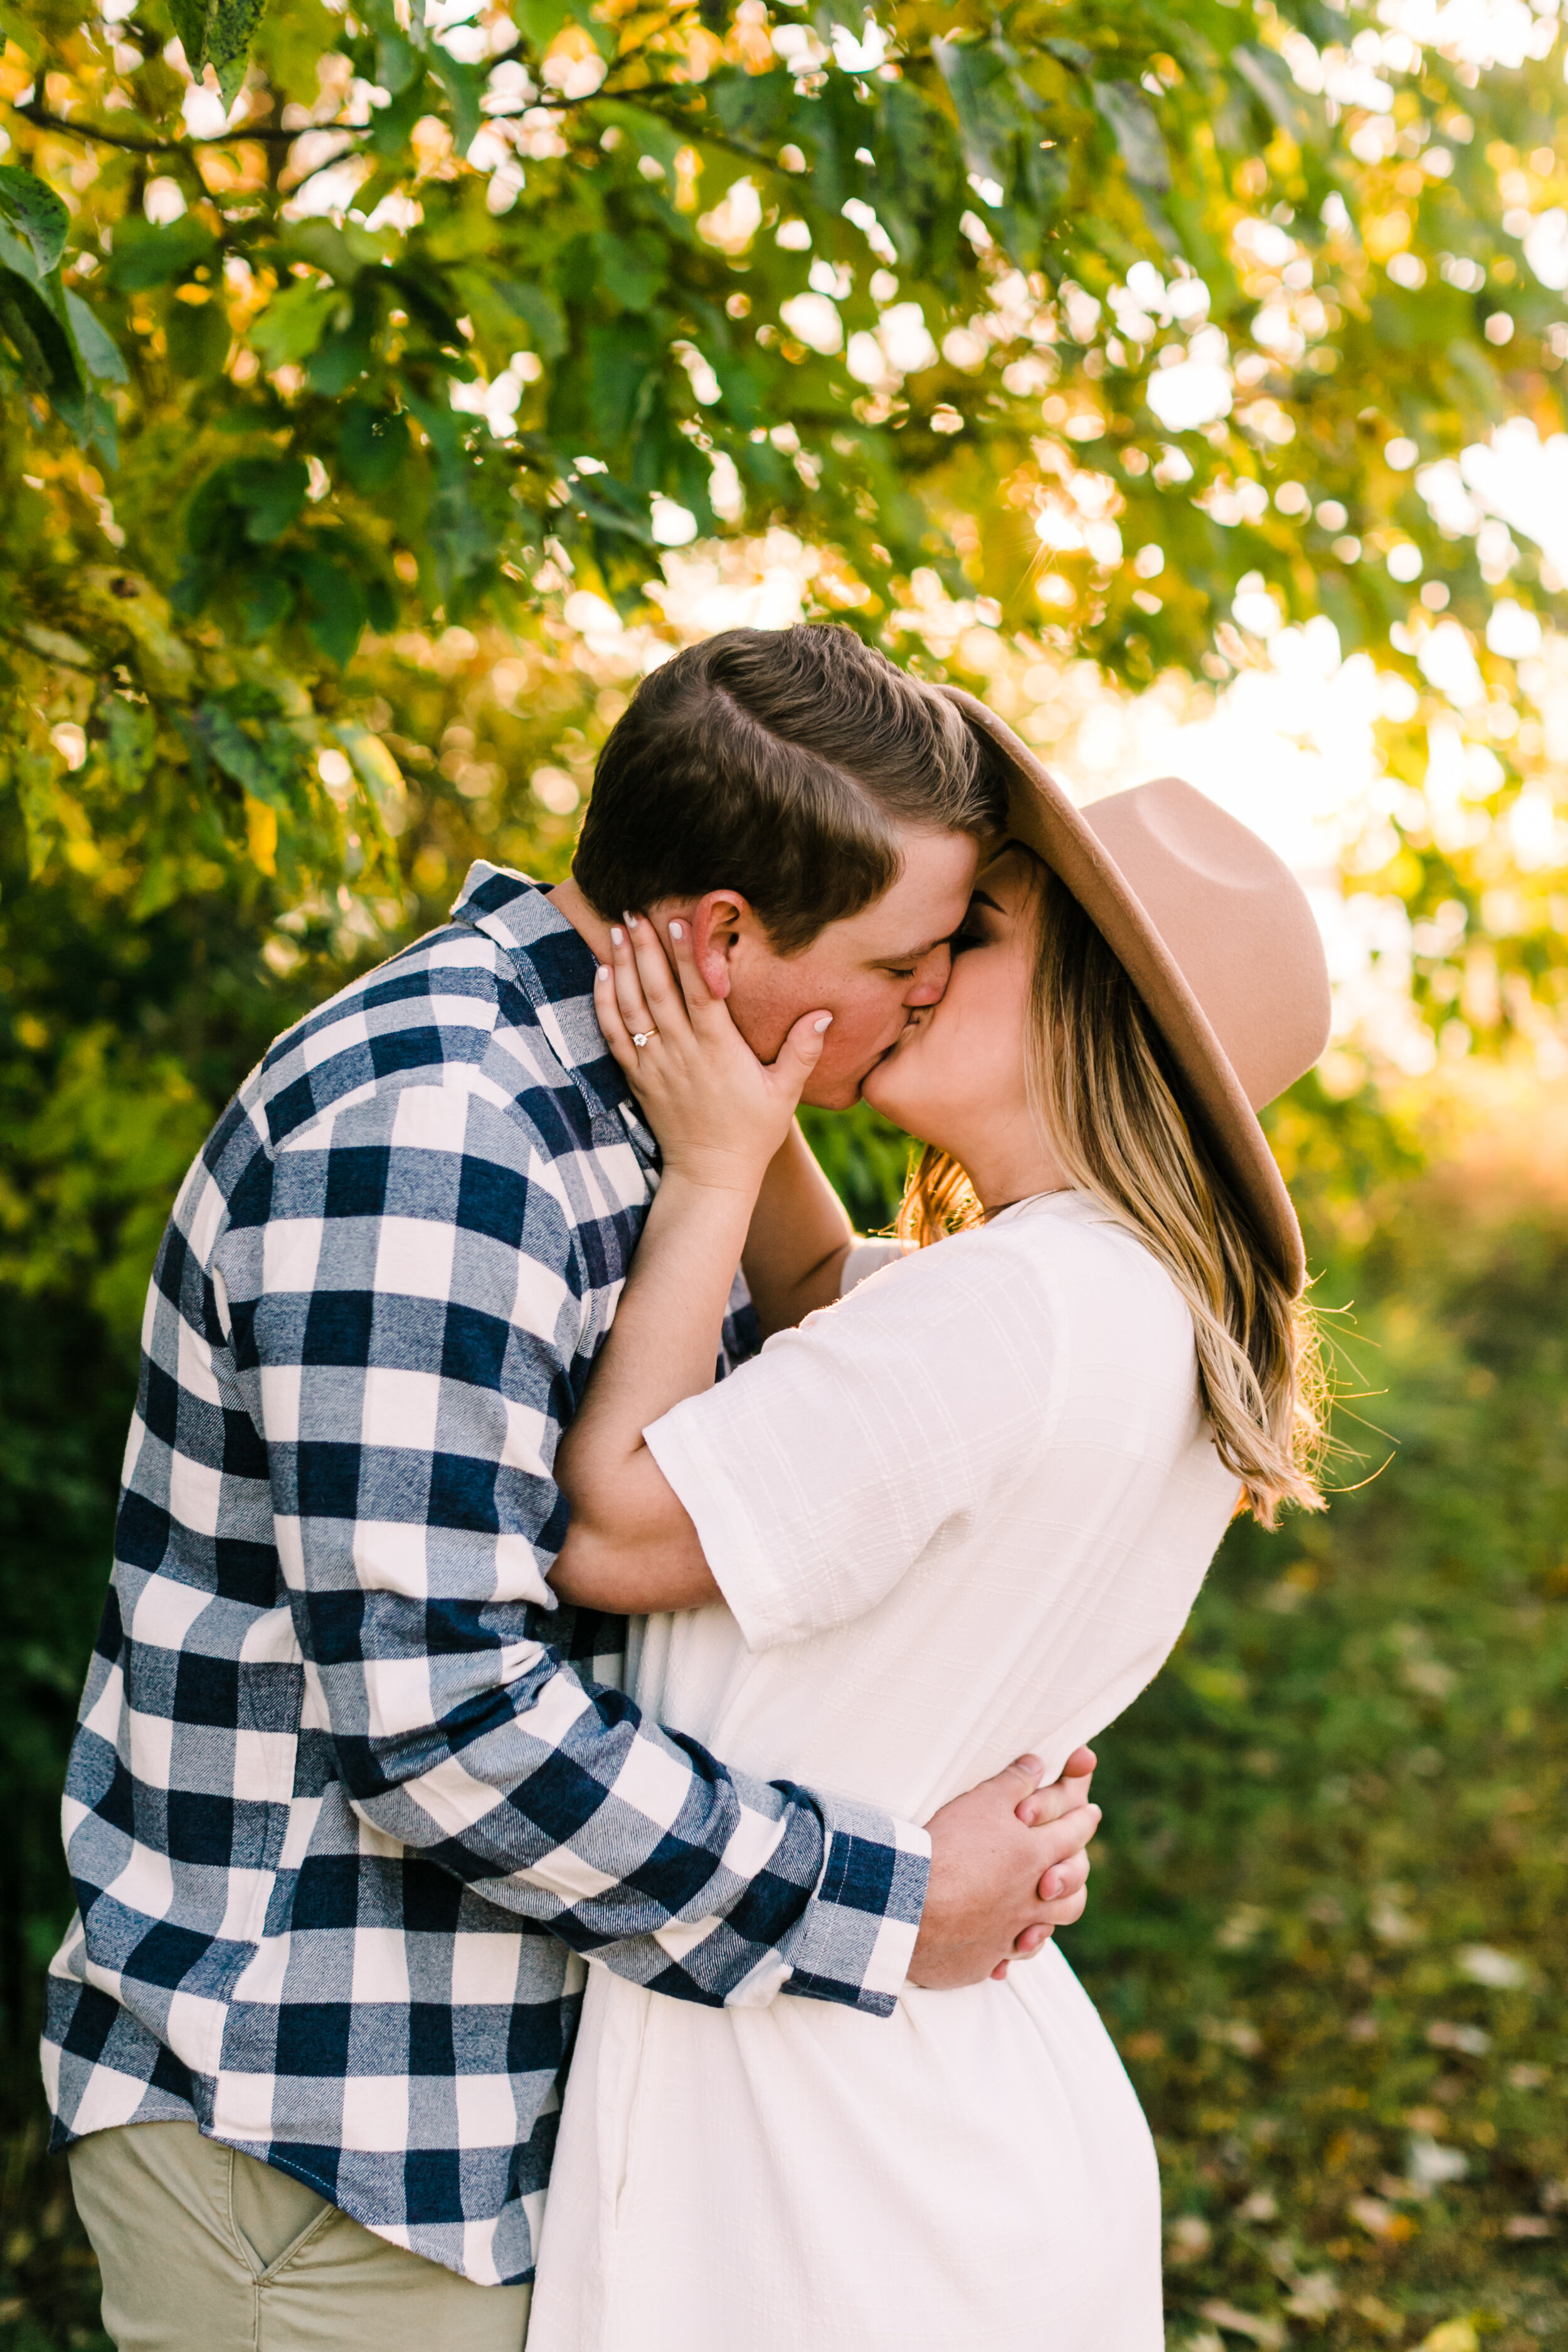 Tennessee+Fall+Engagement+Photos+Puppy (51 of 63).jpg